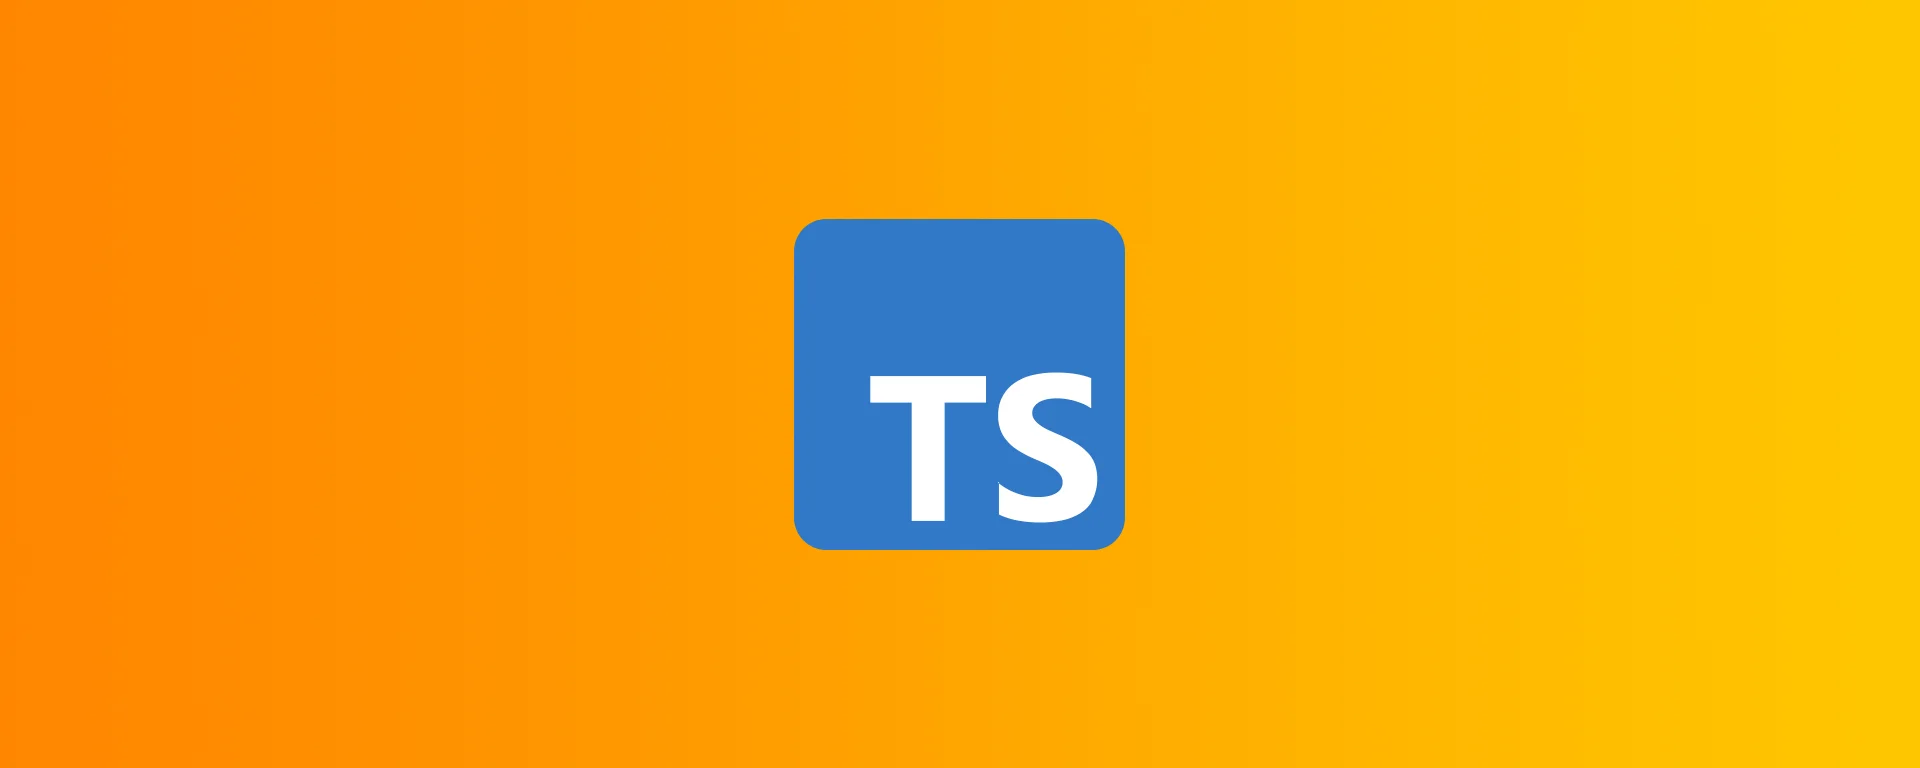 How to set an absolute path in TypeScript